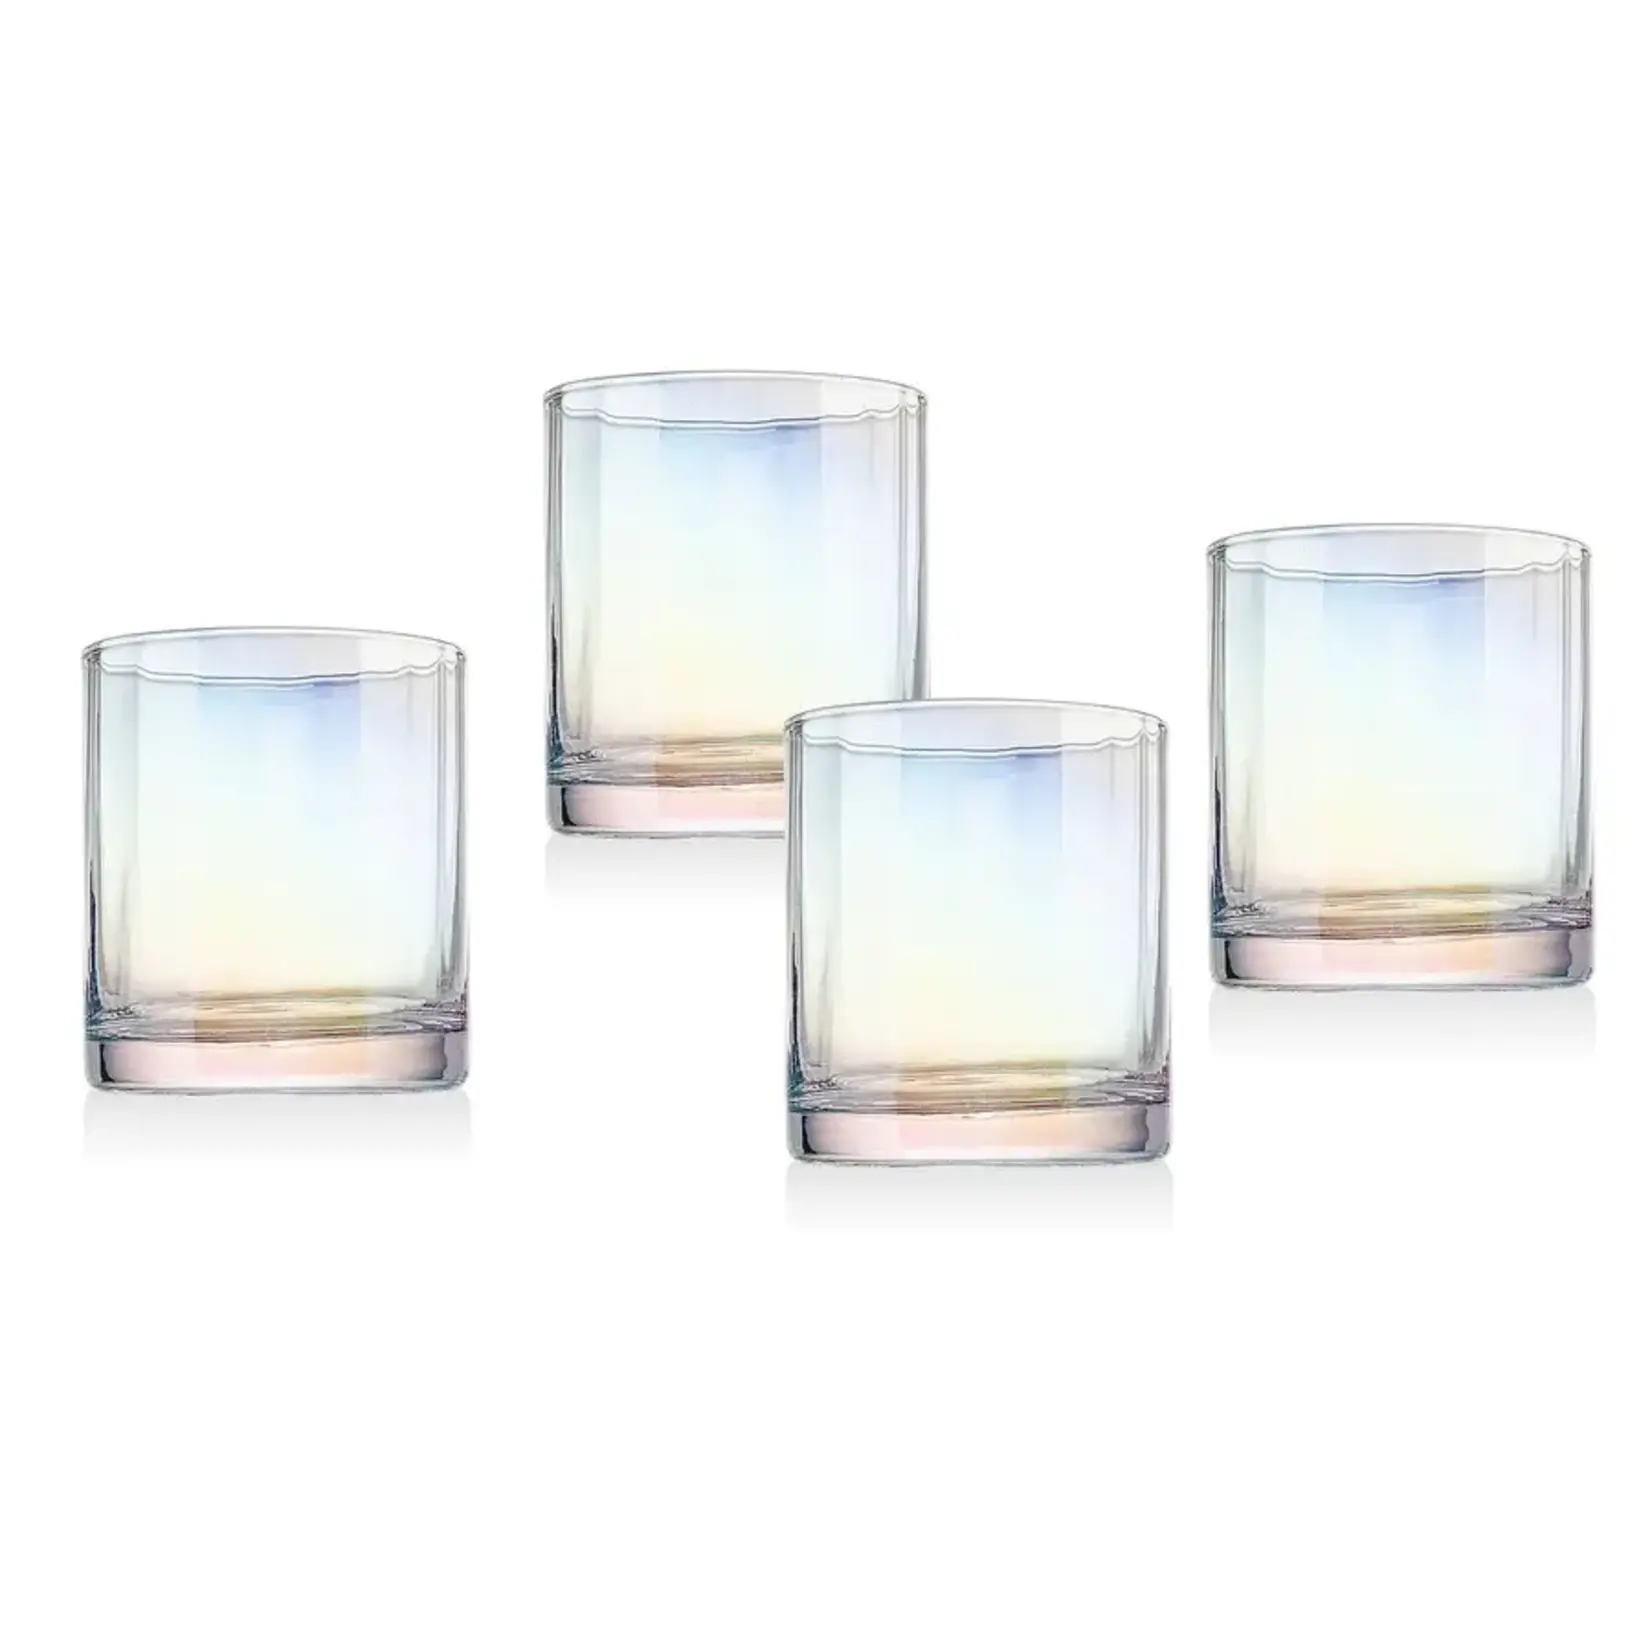 Montery Optic Old Fashioned - Set of 4